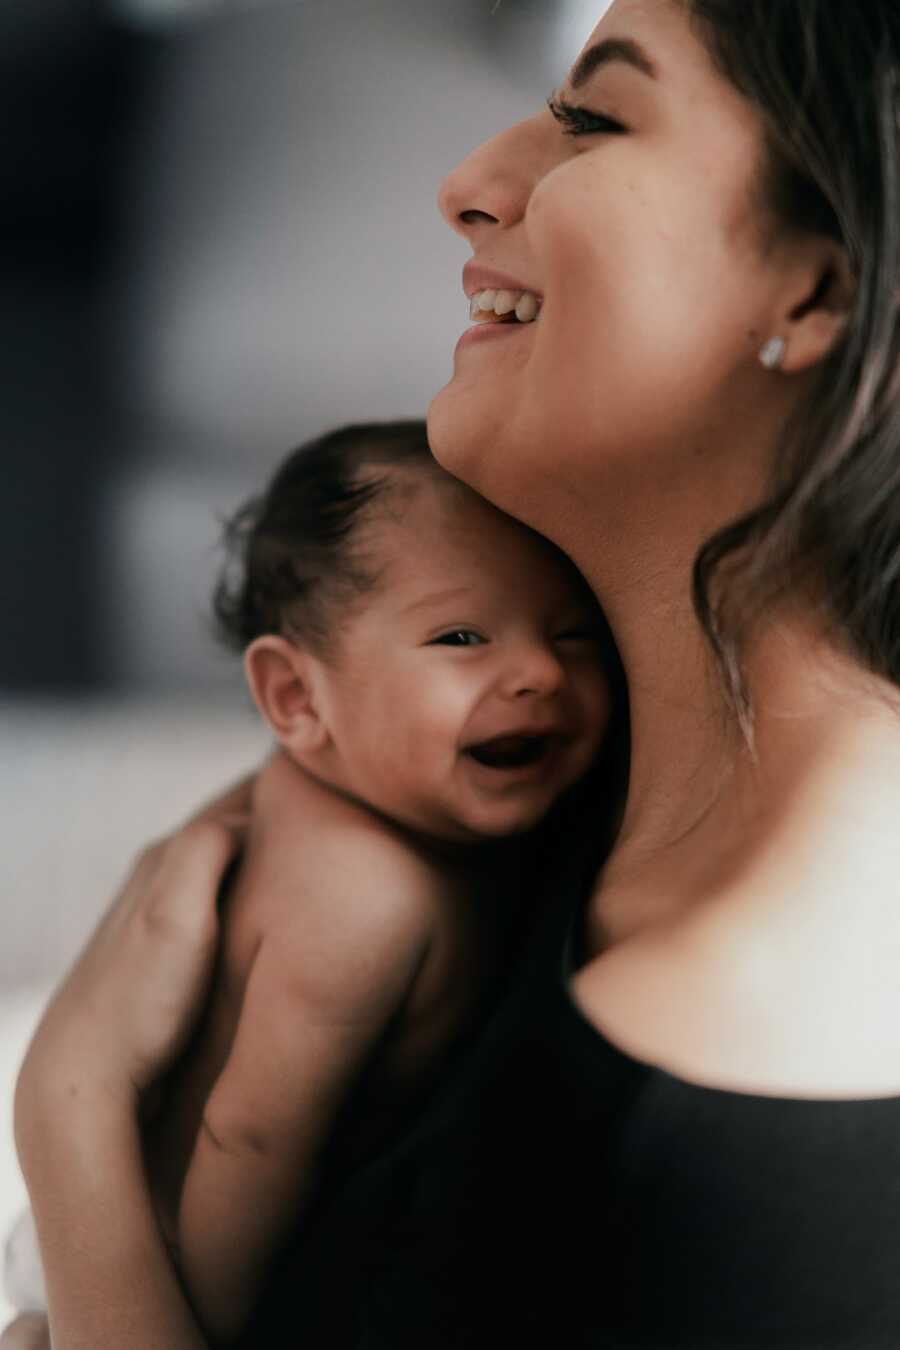 mother smiles wide while holding her baby on her chest